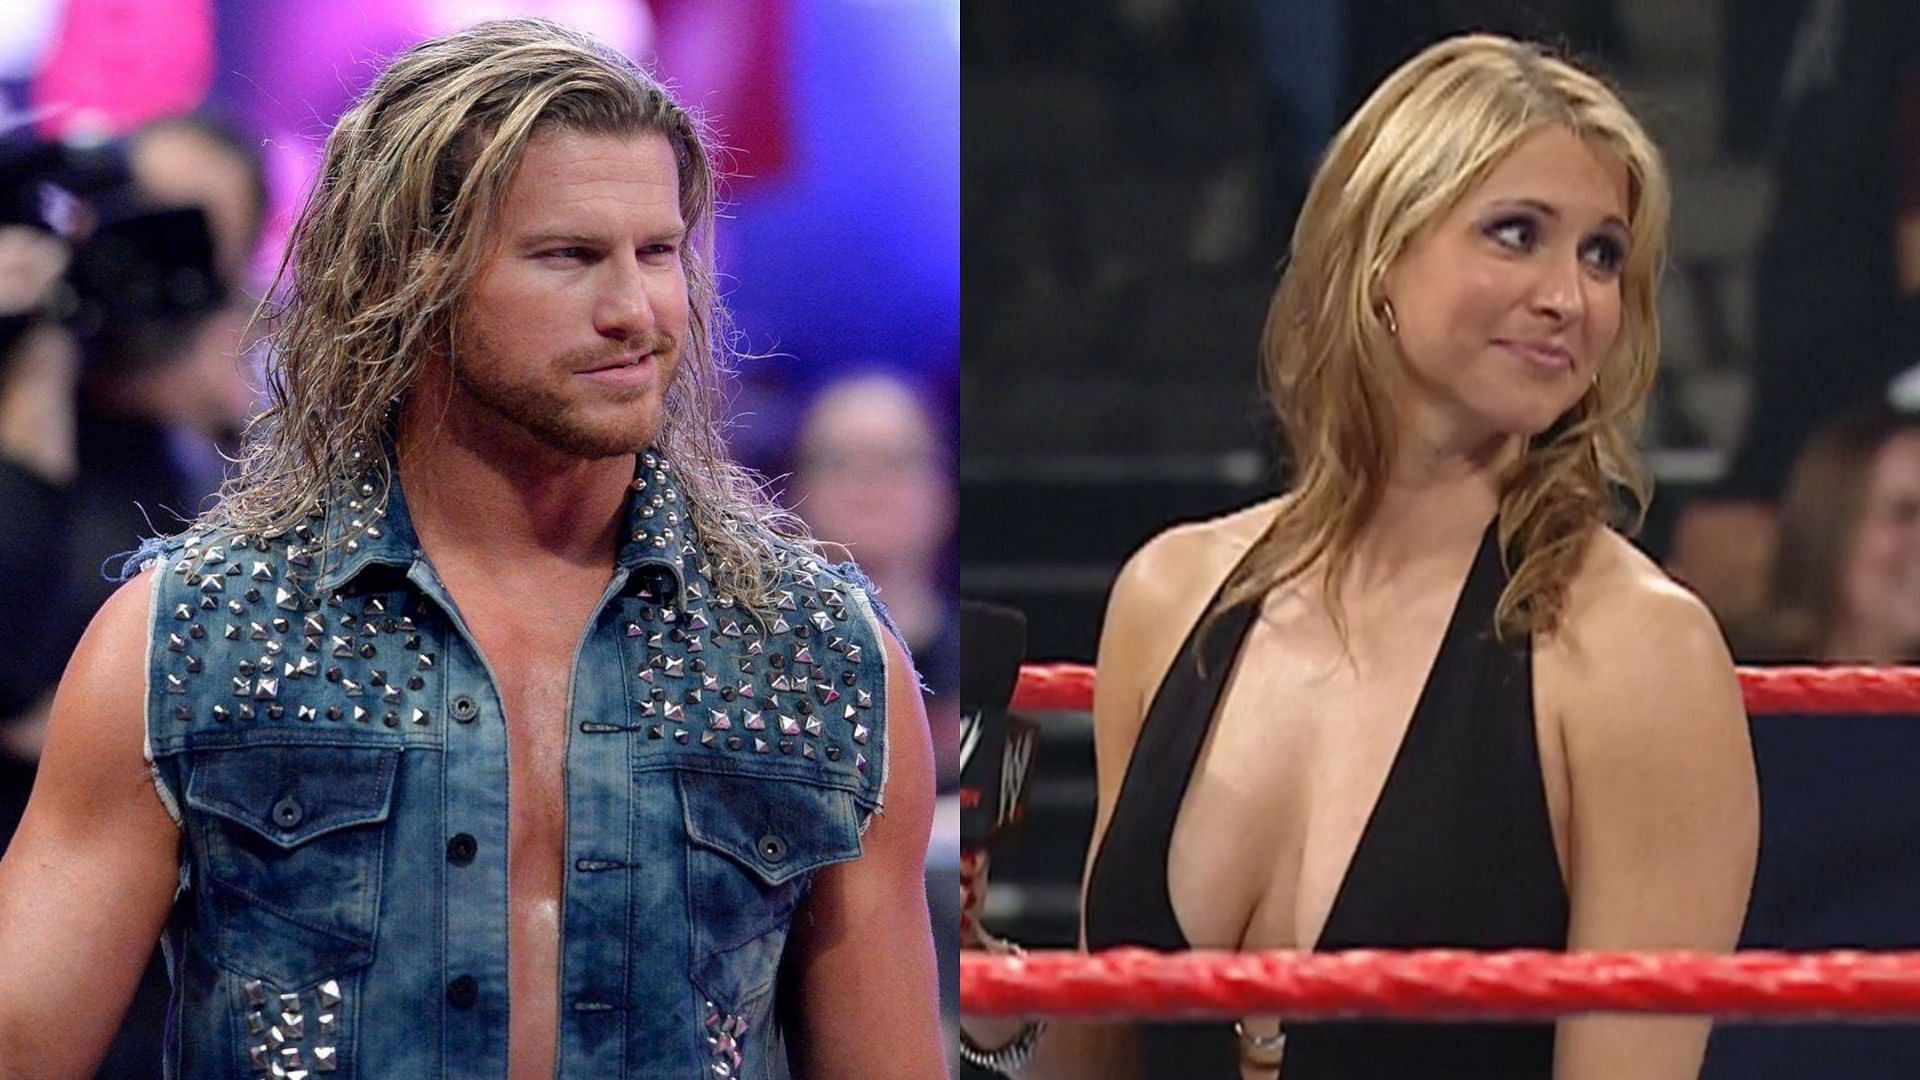 Dolph Ziggler (left) and WWE Interim CEO and Chairwoman Stephanie McMahon (right)